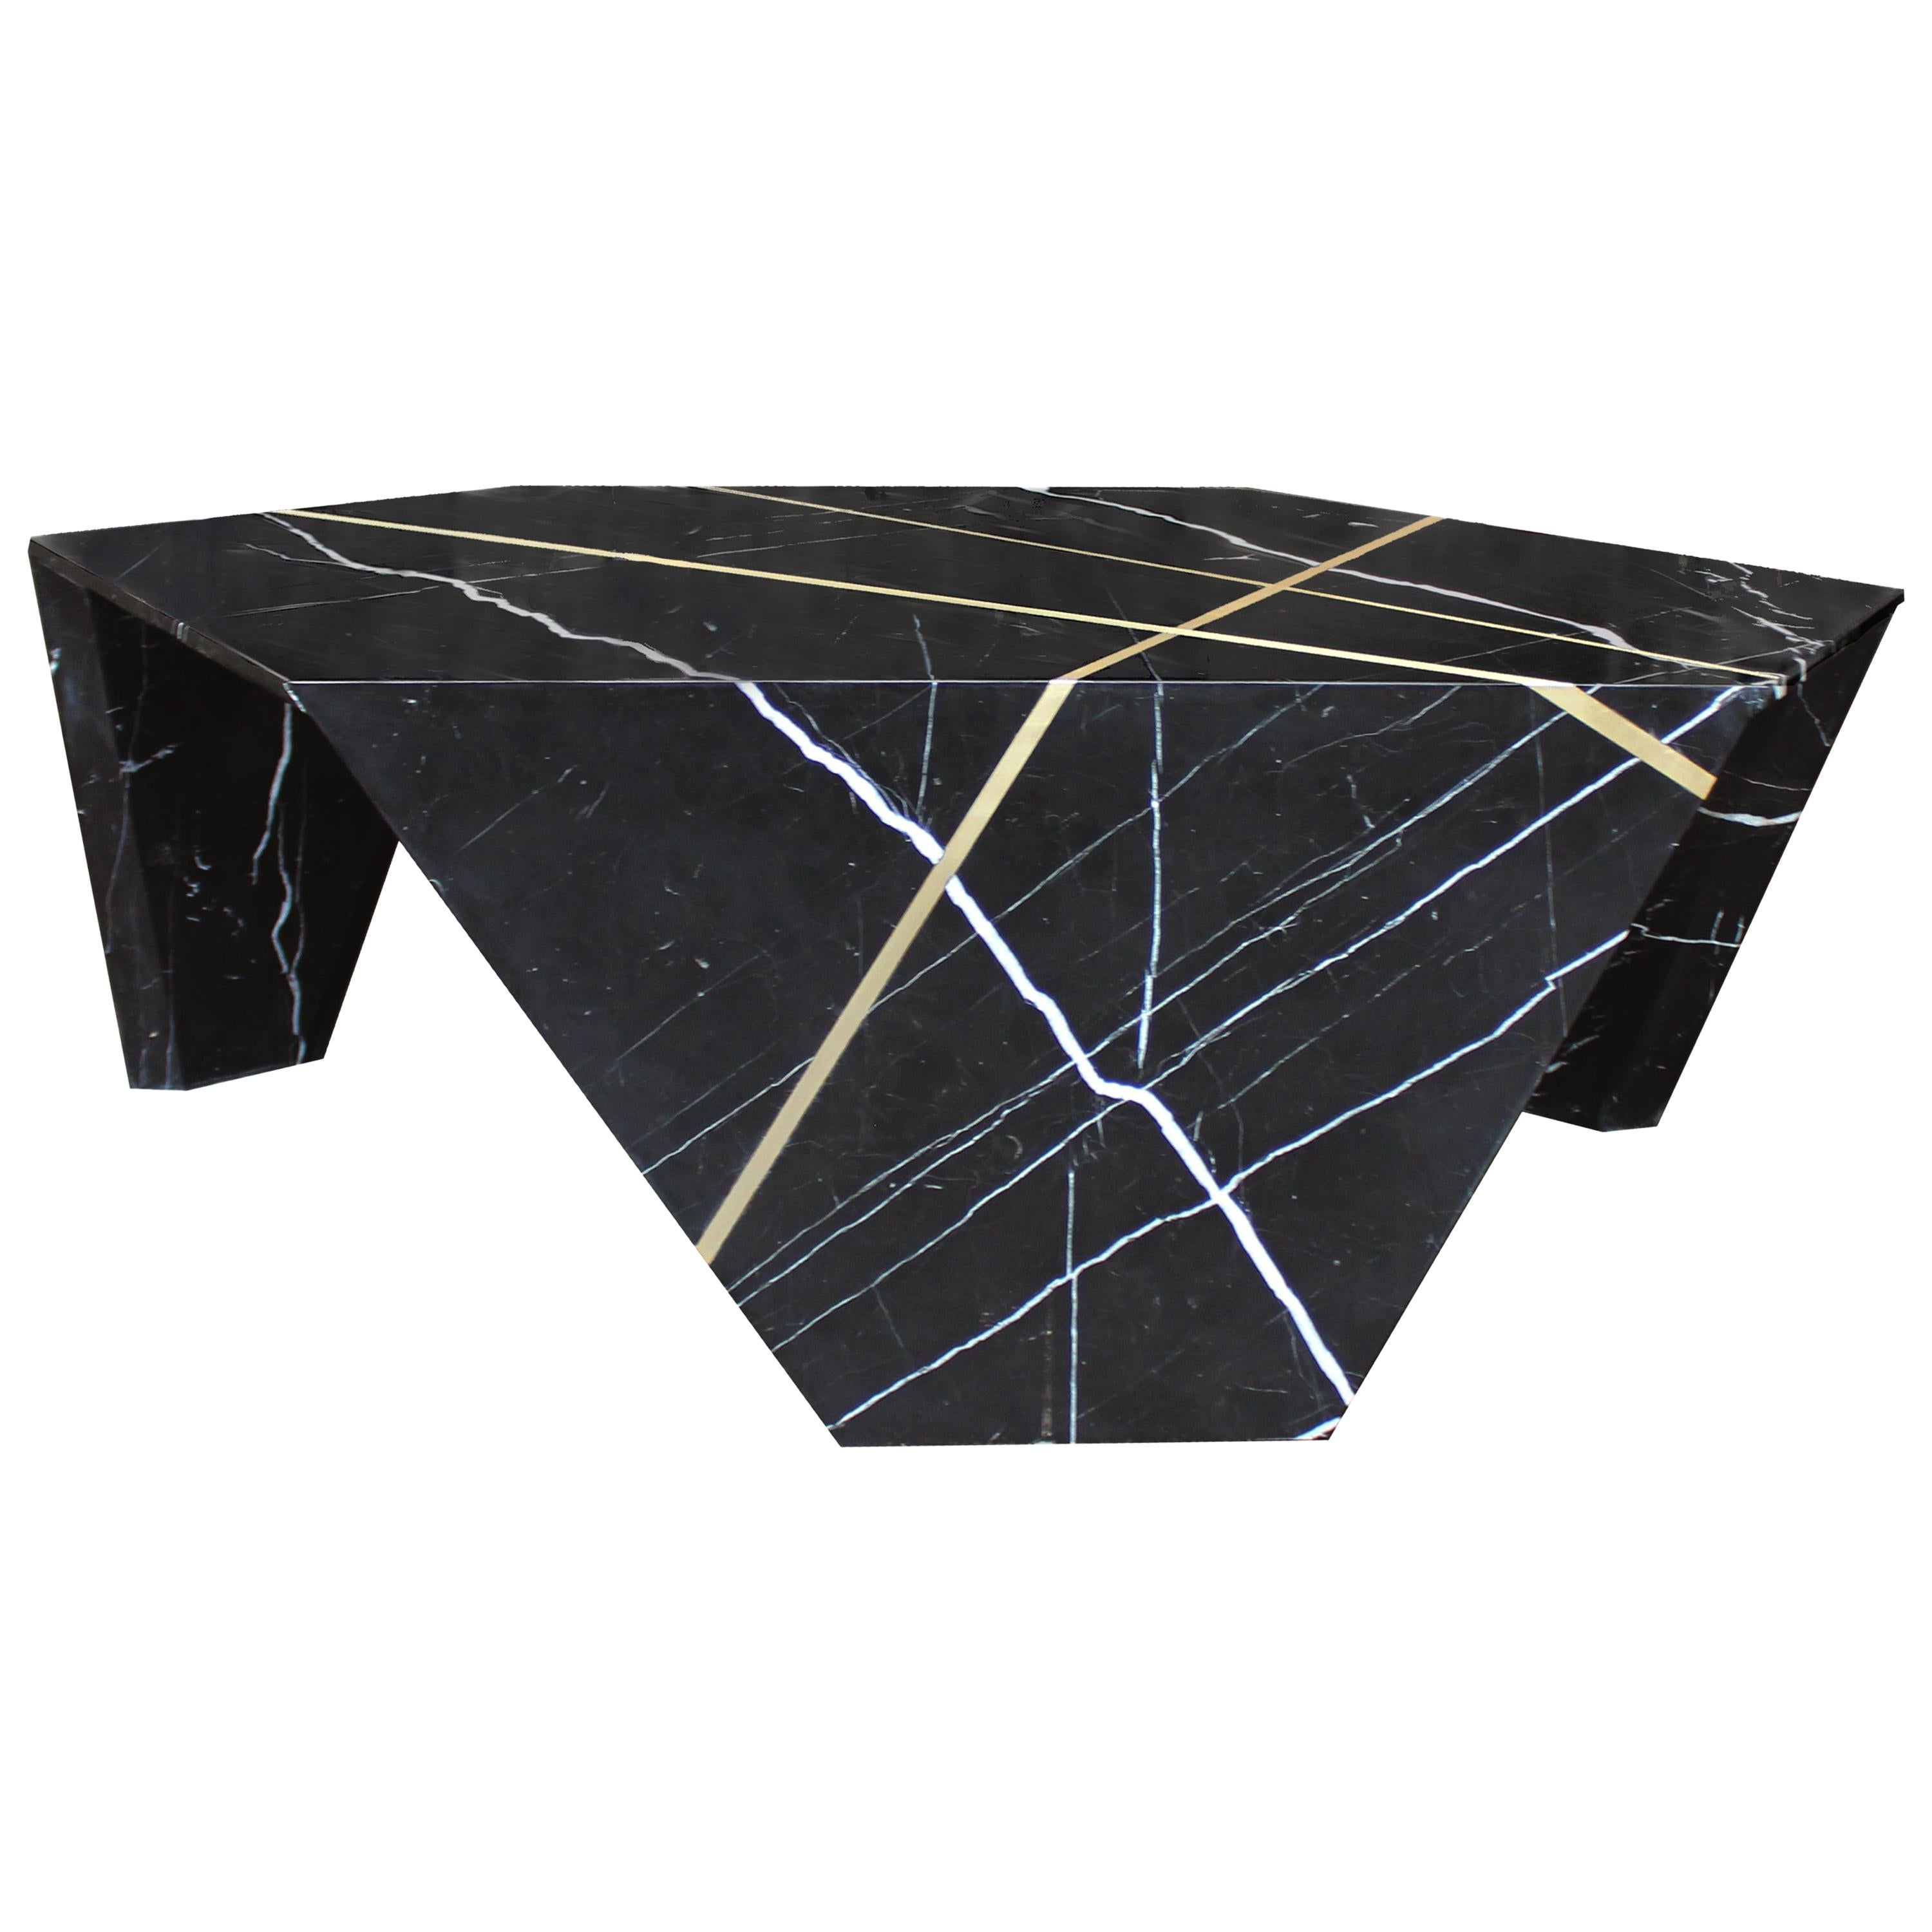 James Devlin Studio’s planar cocktail table combines single slab marble with inlaid bronze to create a uniquely beautiful stone origami sculpture. Each piece begins with a single marble slab cut and mitered into customizable geometric shapes that